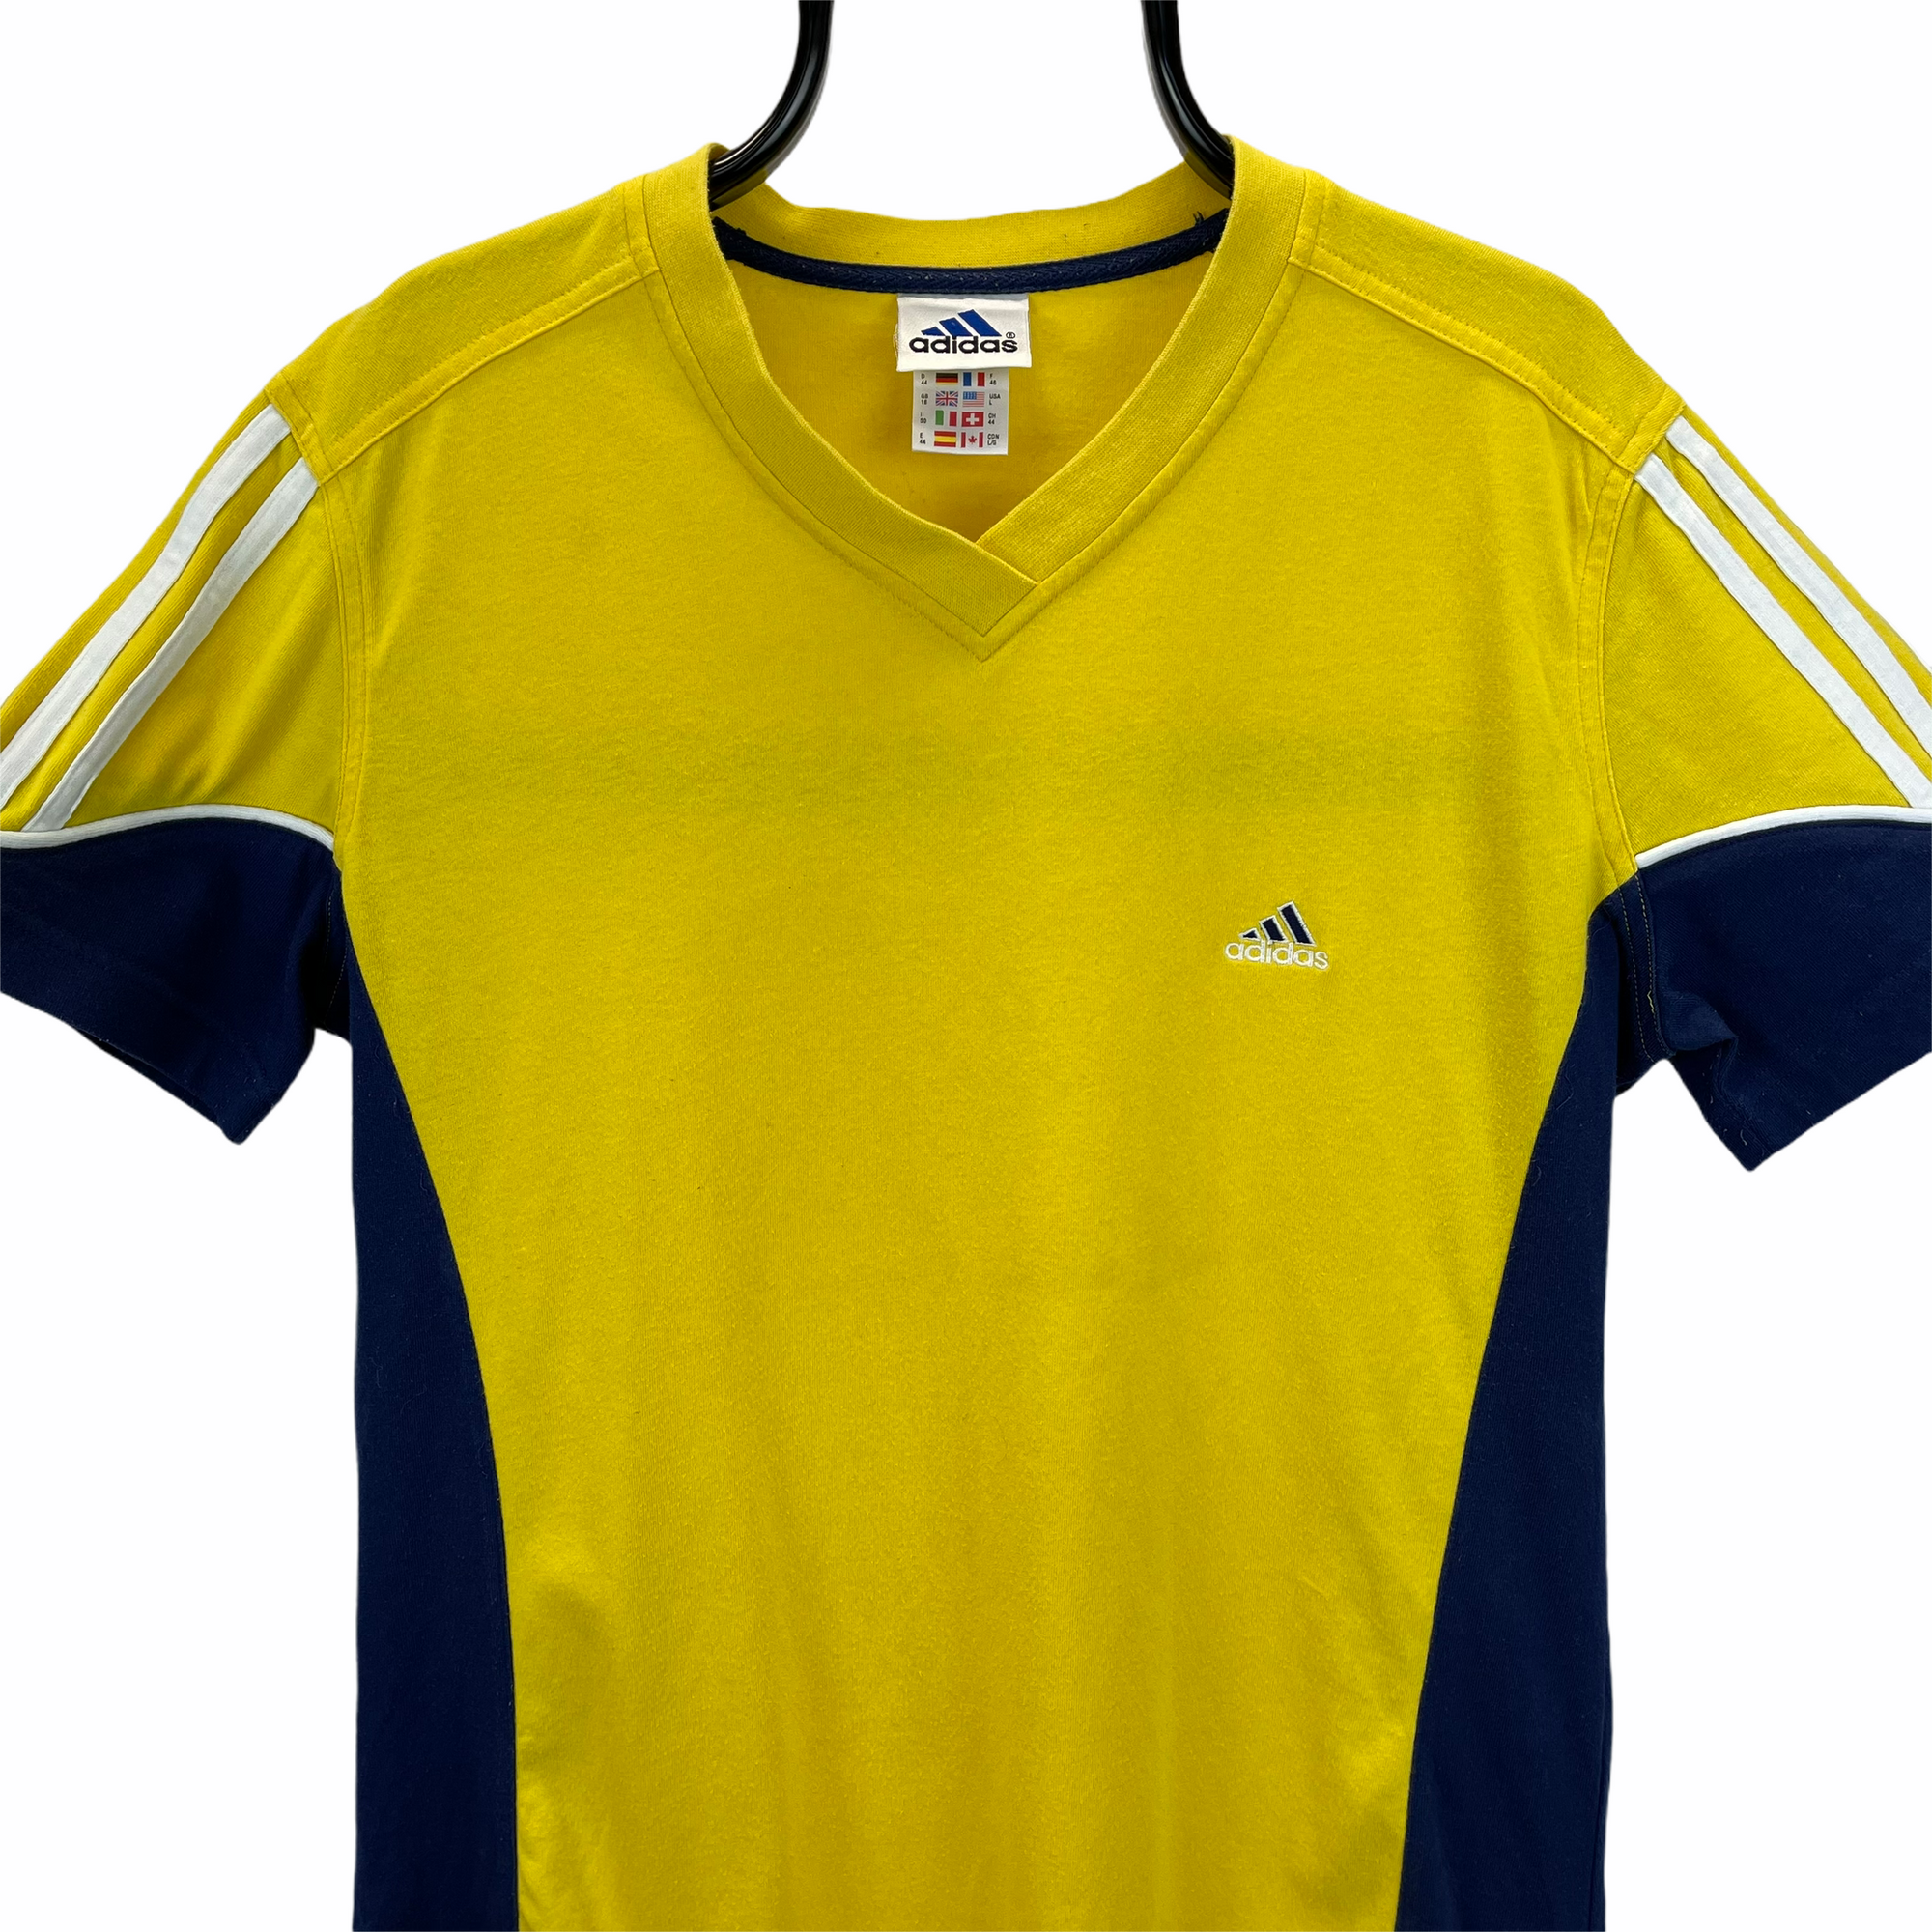 Vintage 90s Adidas Embroidered Logo Tee in Yellow & Navy - Men's Large/Women's XL